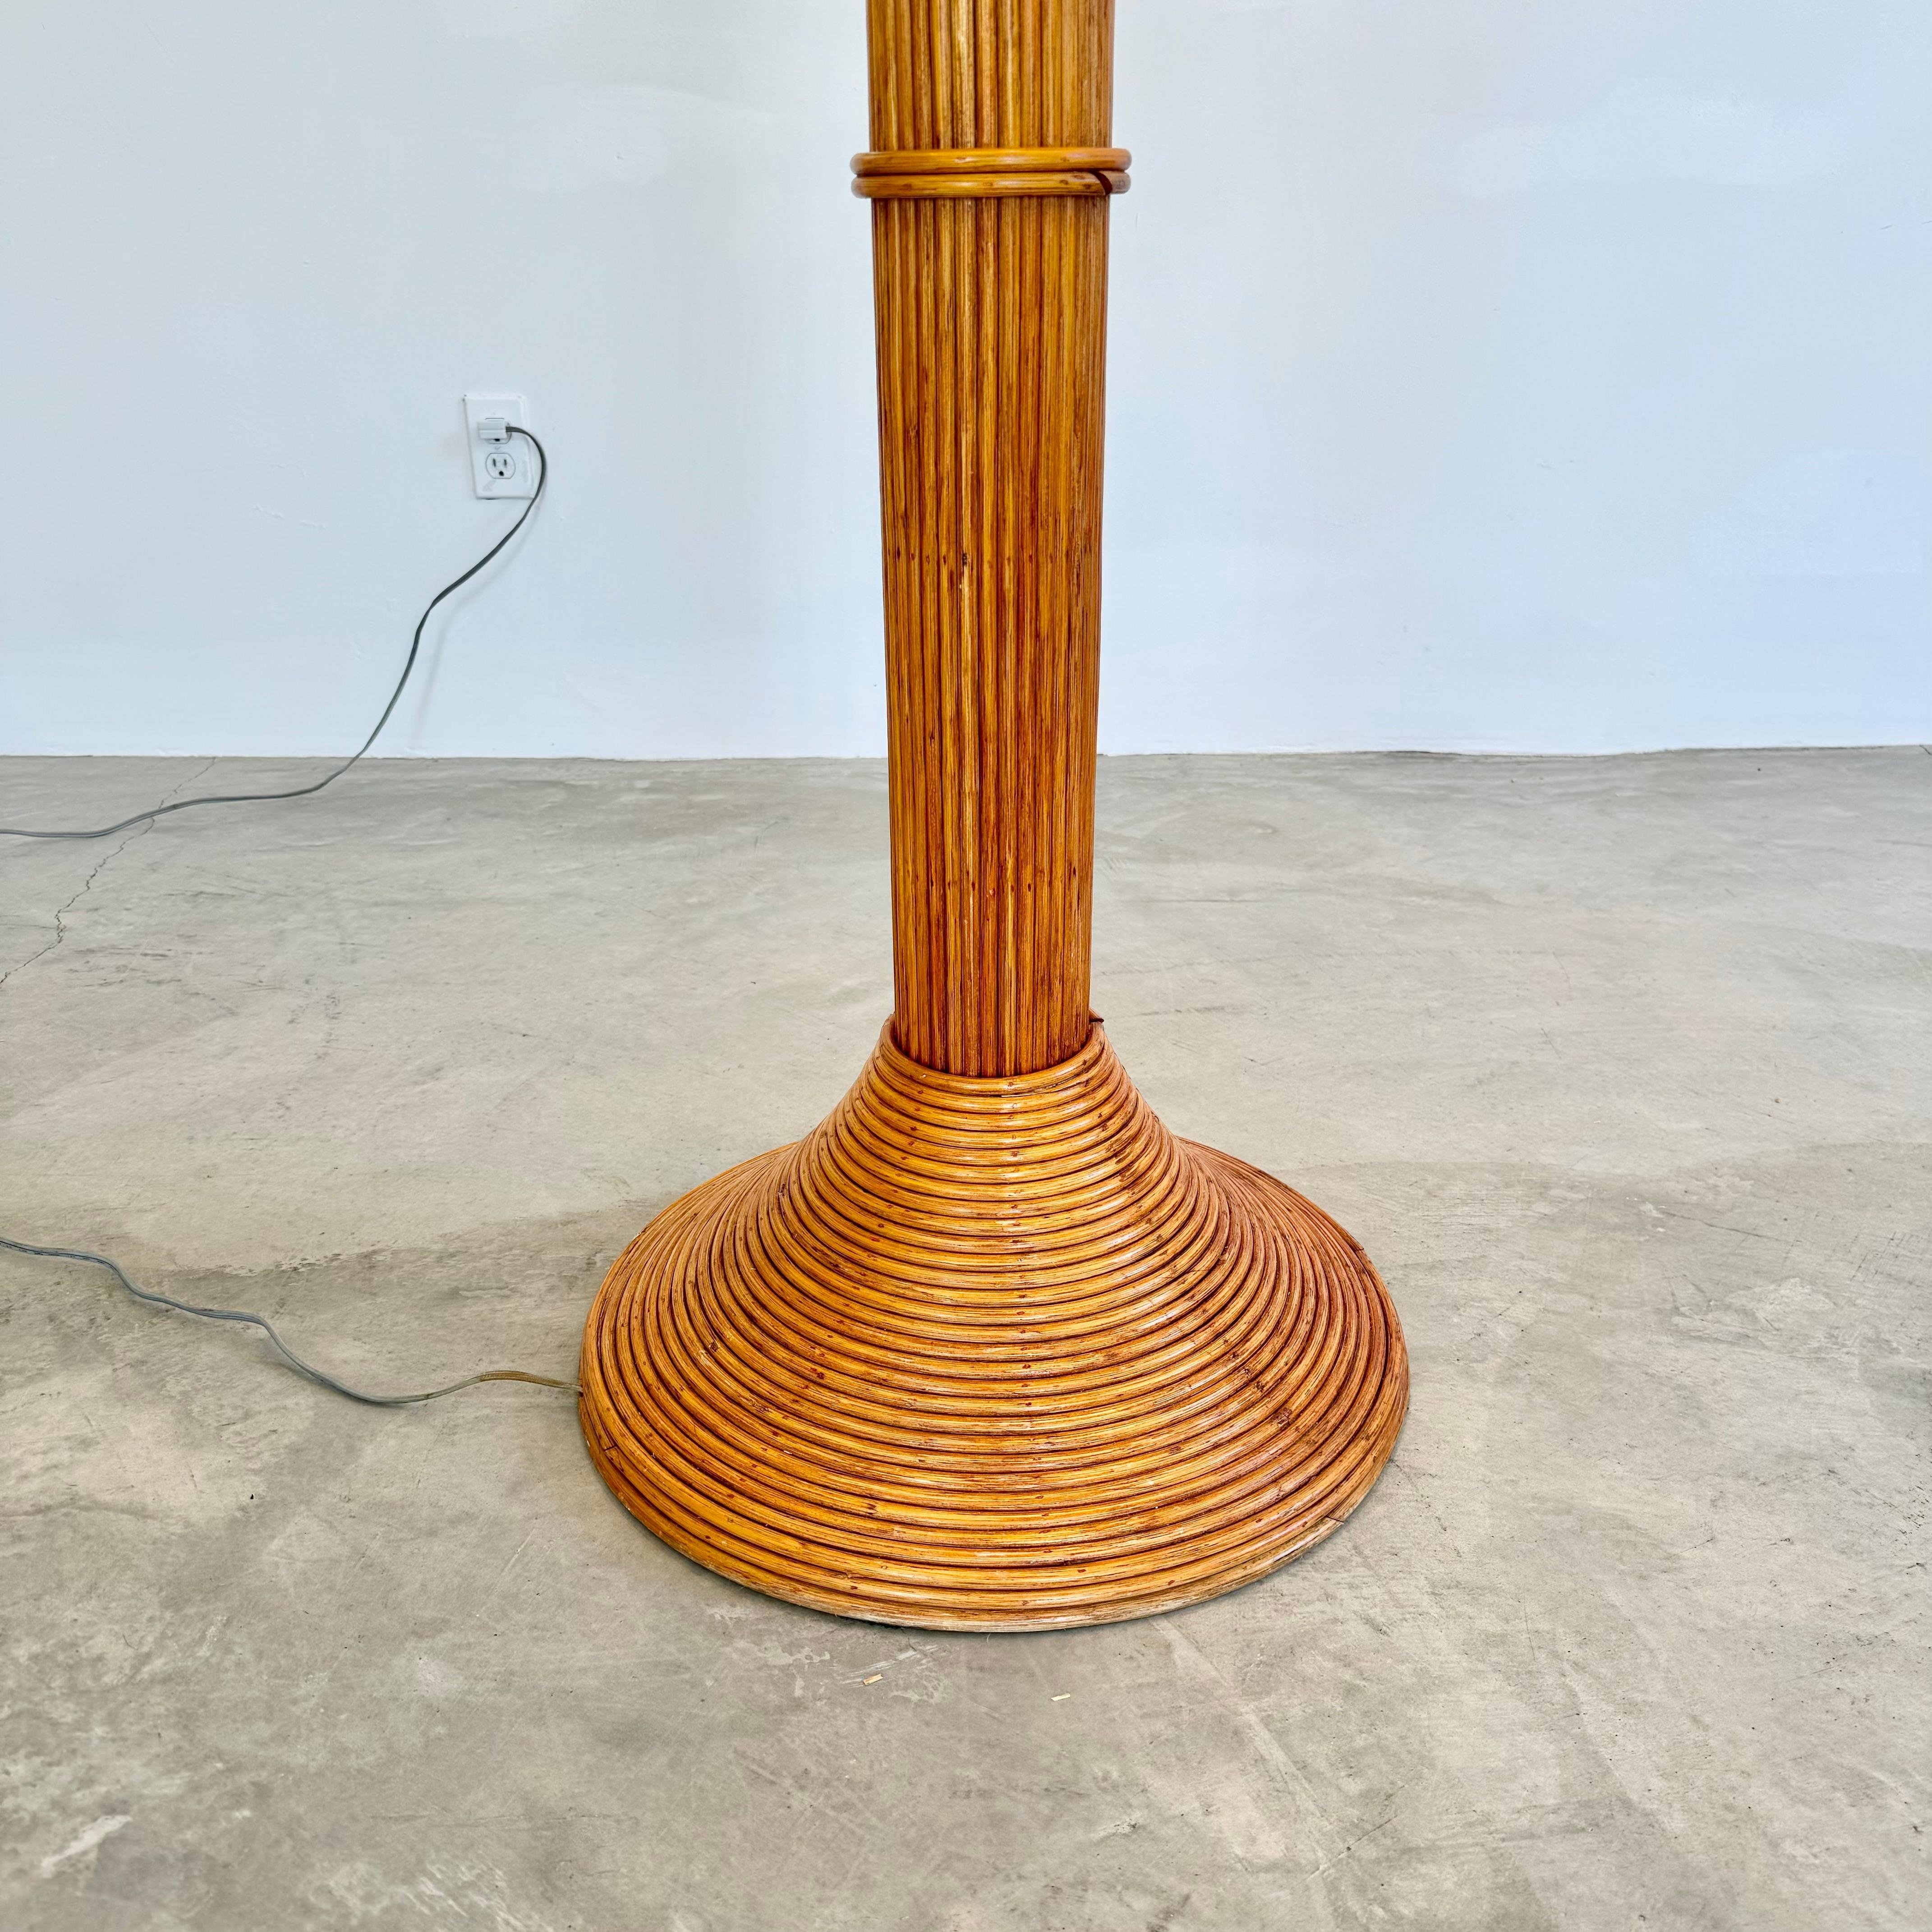 Bamboo Rattan and Wicker Palm Tree Floor Lamp, 1970s United States For Sale